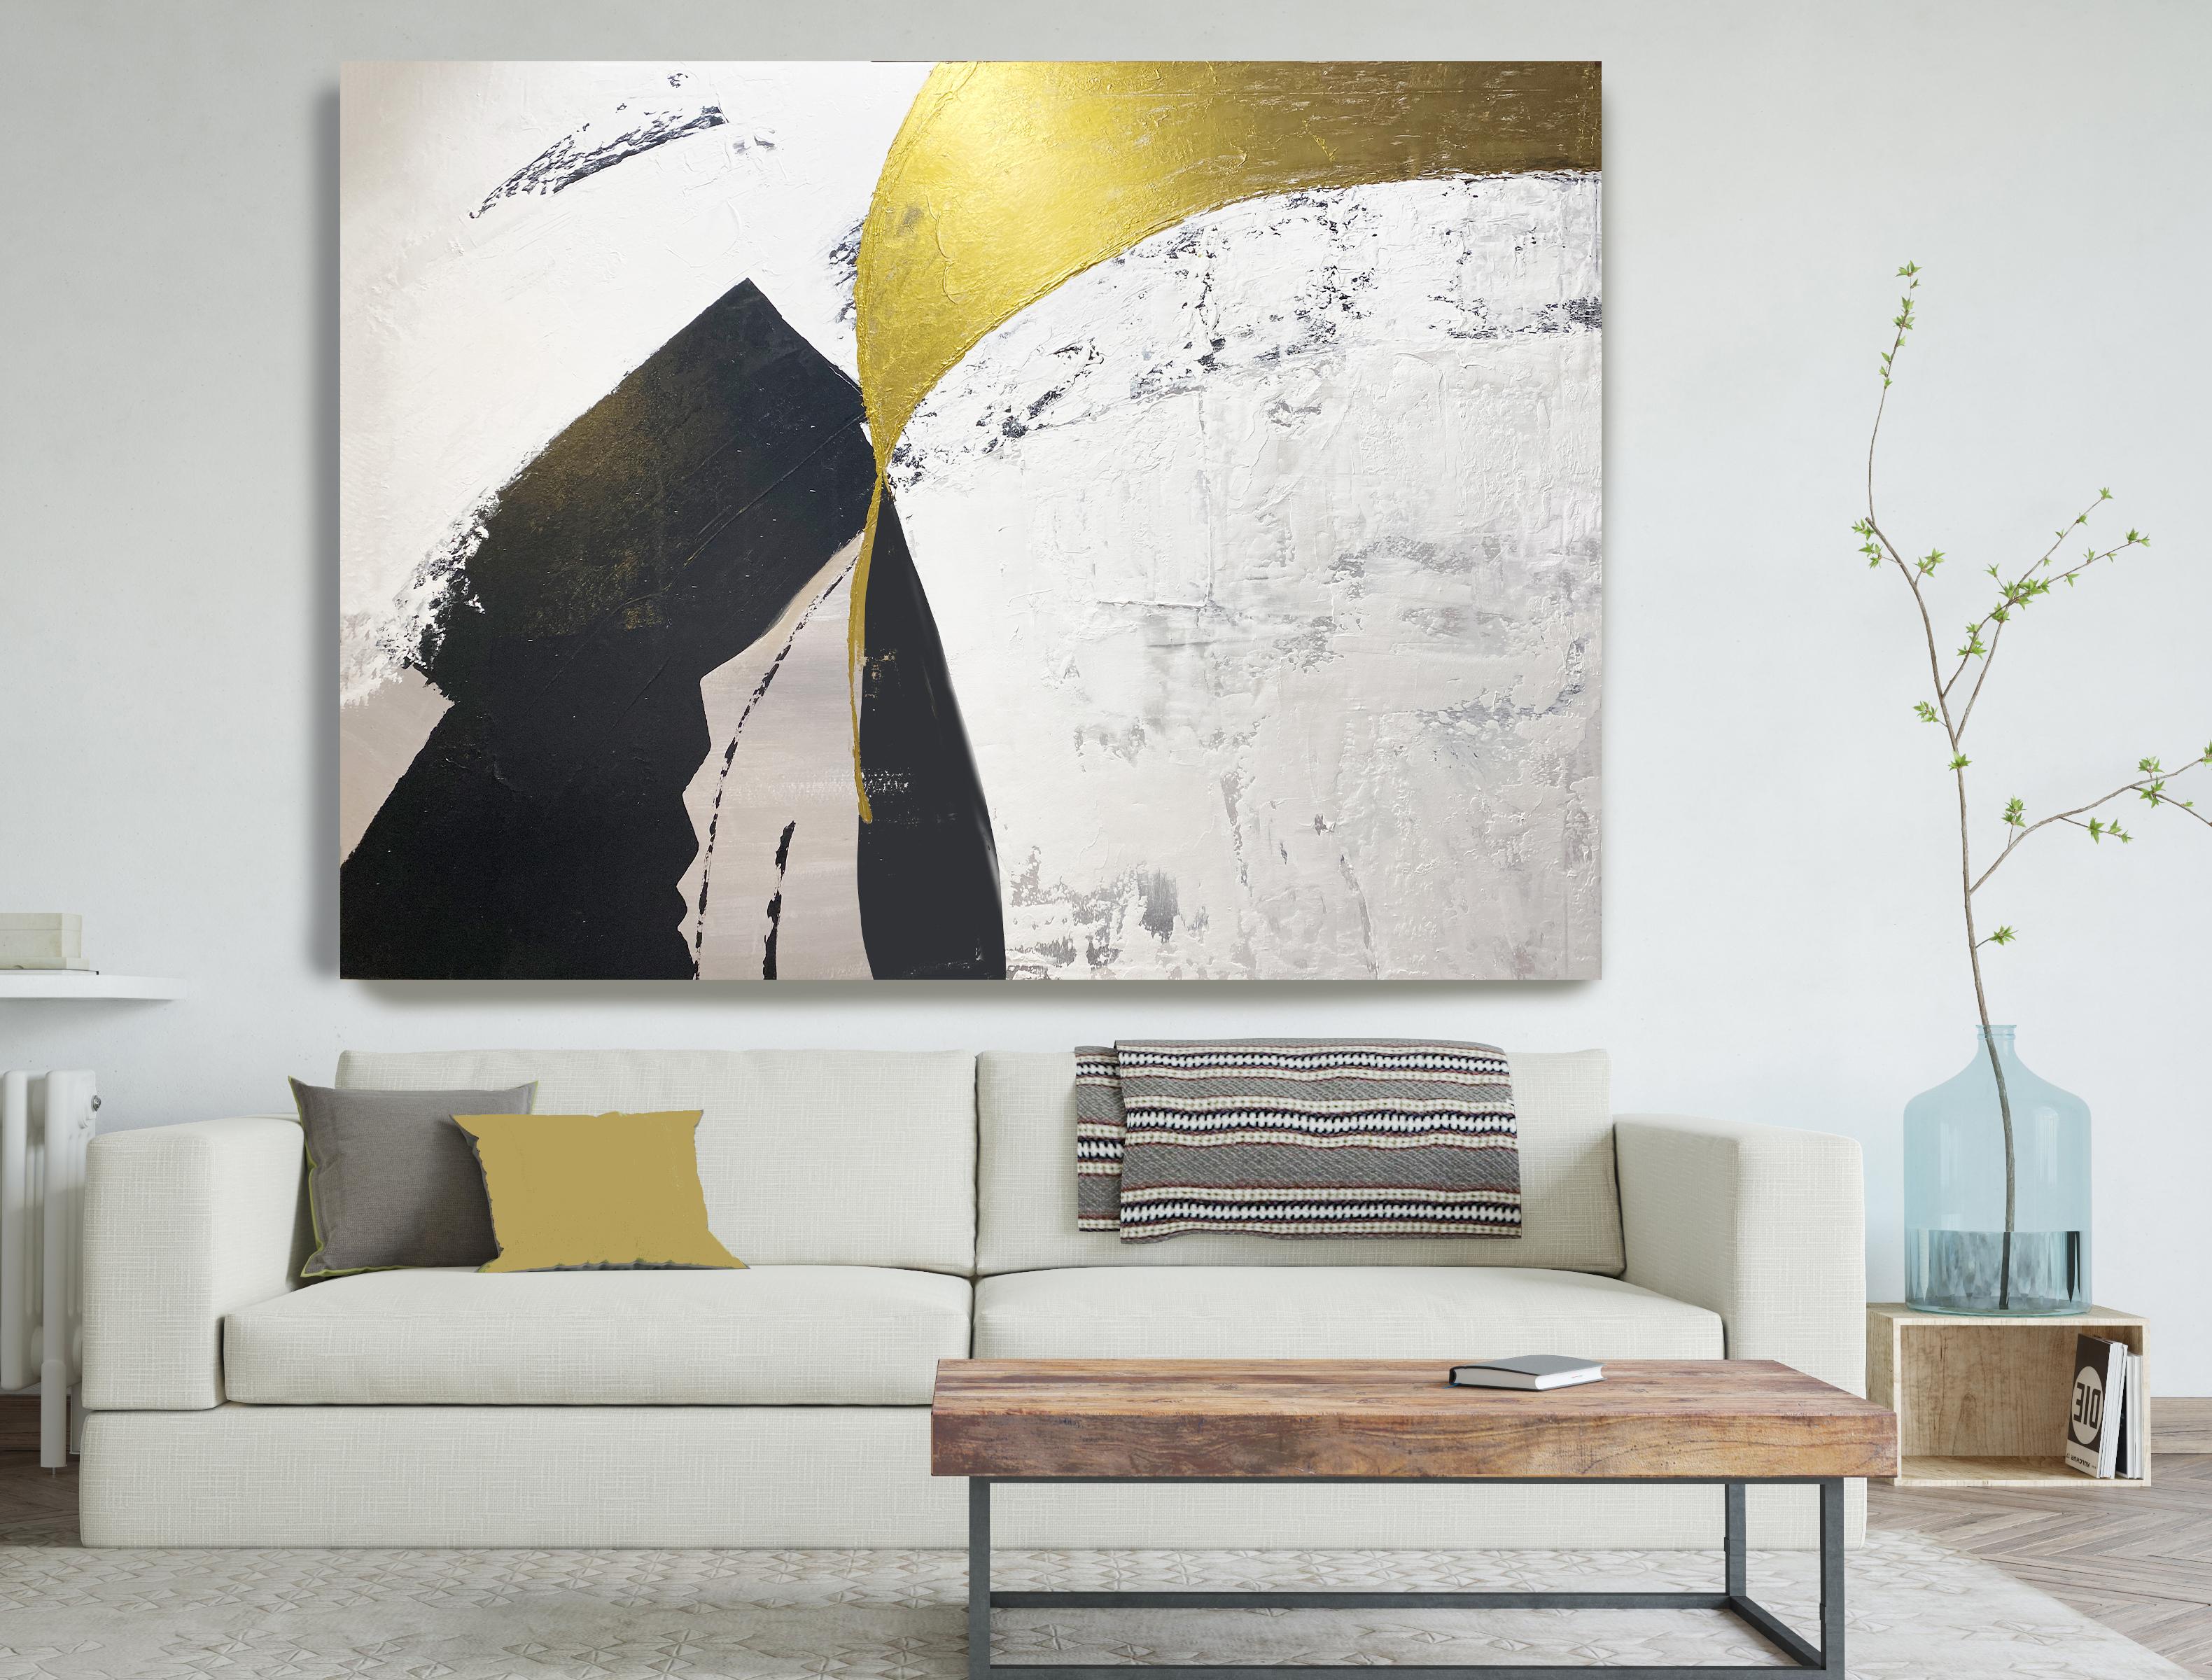  'Gold Black White Abstract Mixed Media Painting.' This Collector's Edition artwork is an exquisite creation by the highly acclaimed artist, Irena Orlov.

SPECIFICATIONS:

Fine art canvas
Professionally hand-stretched over 1